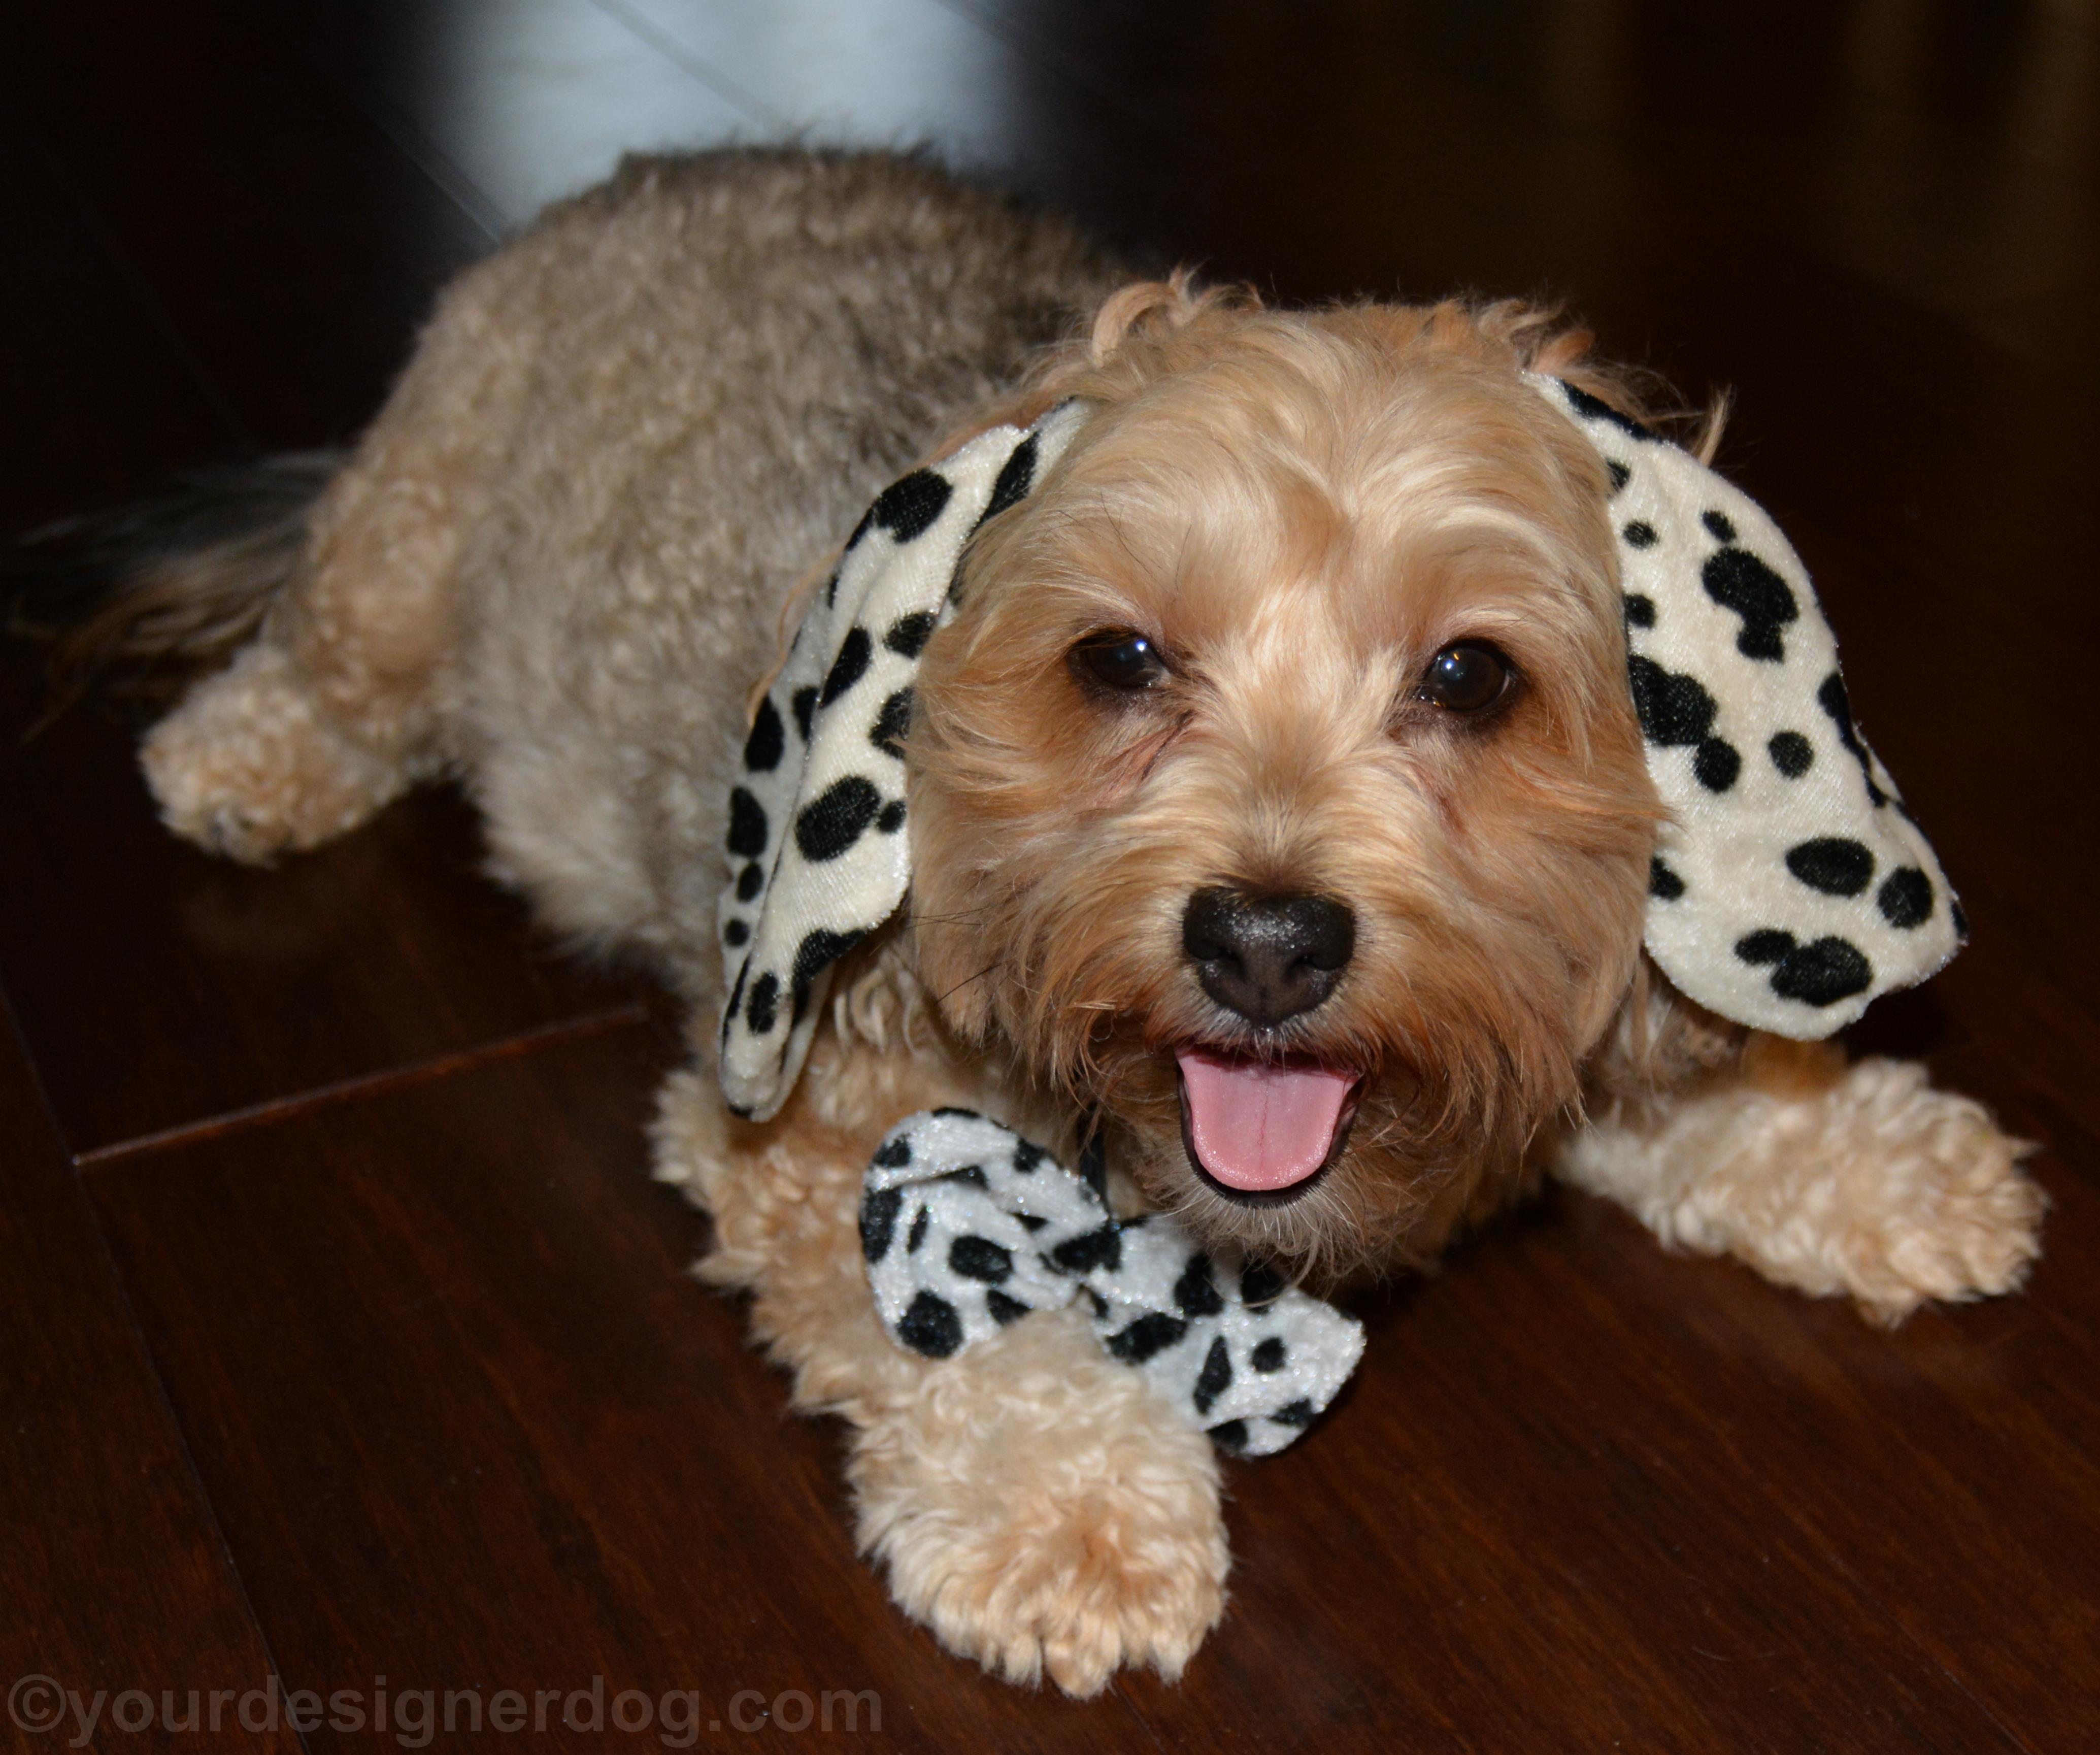 dogs, designer dogs, yorkipoo, yorkie poo, tongue out, dalmatian, halloween costume